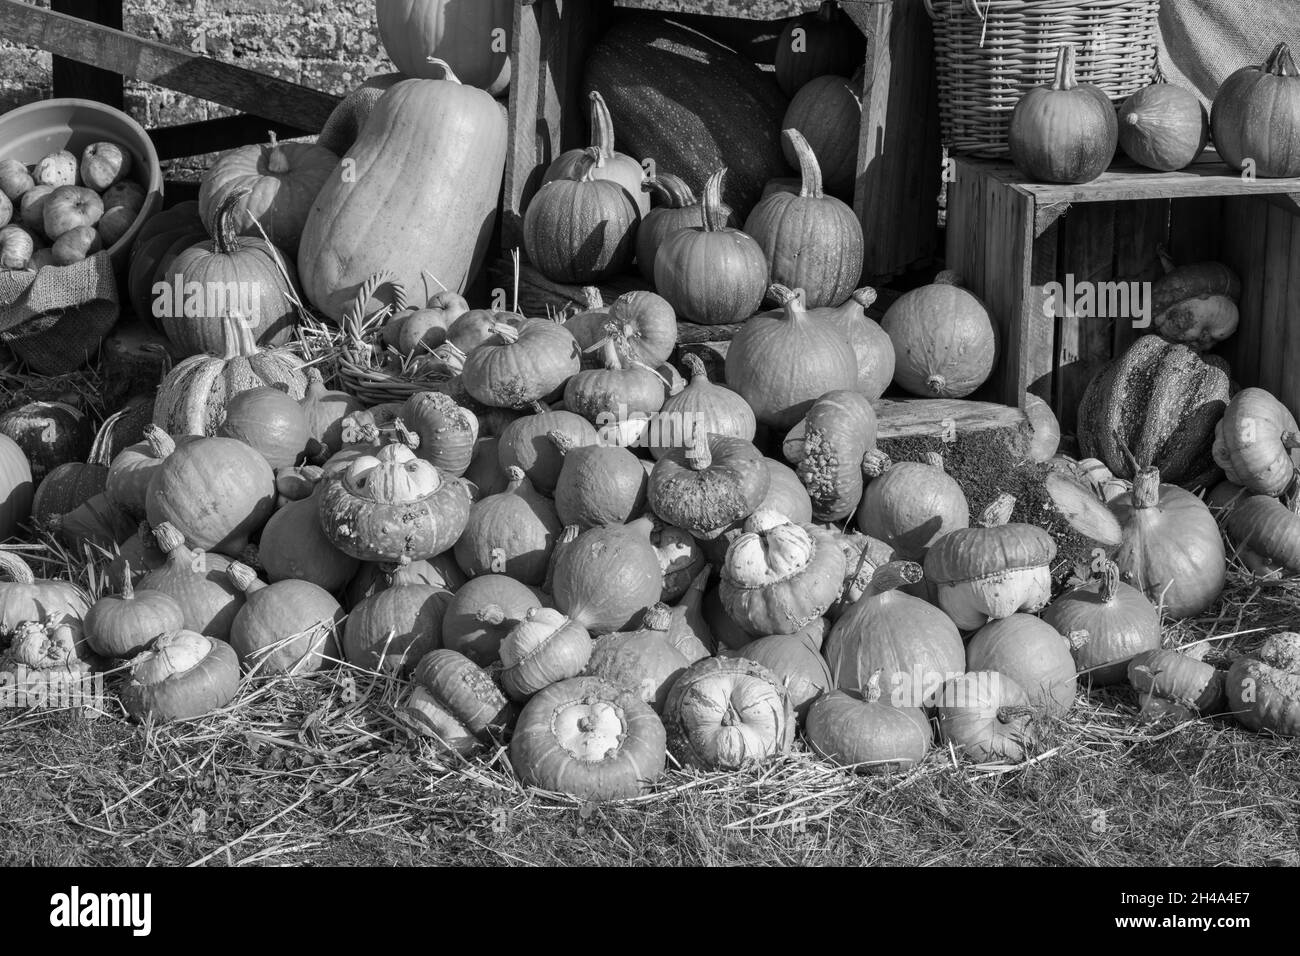 A pile of pumpkins on the ground Stock Photo